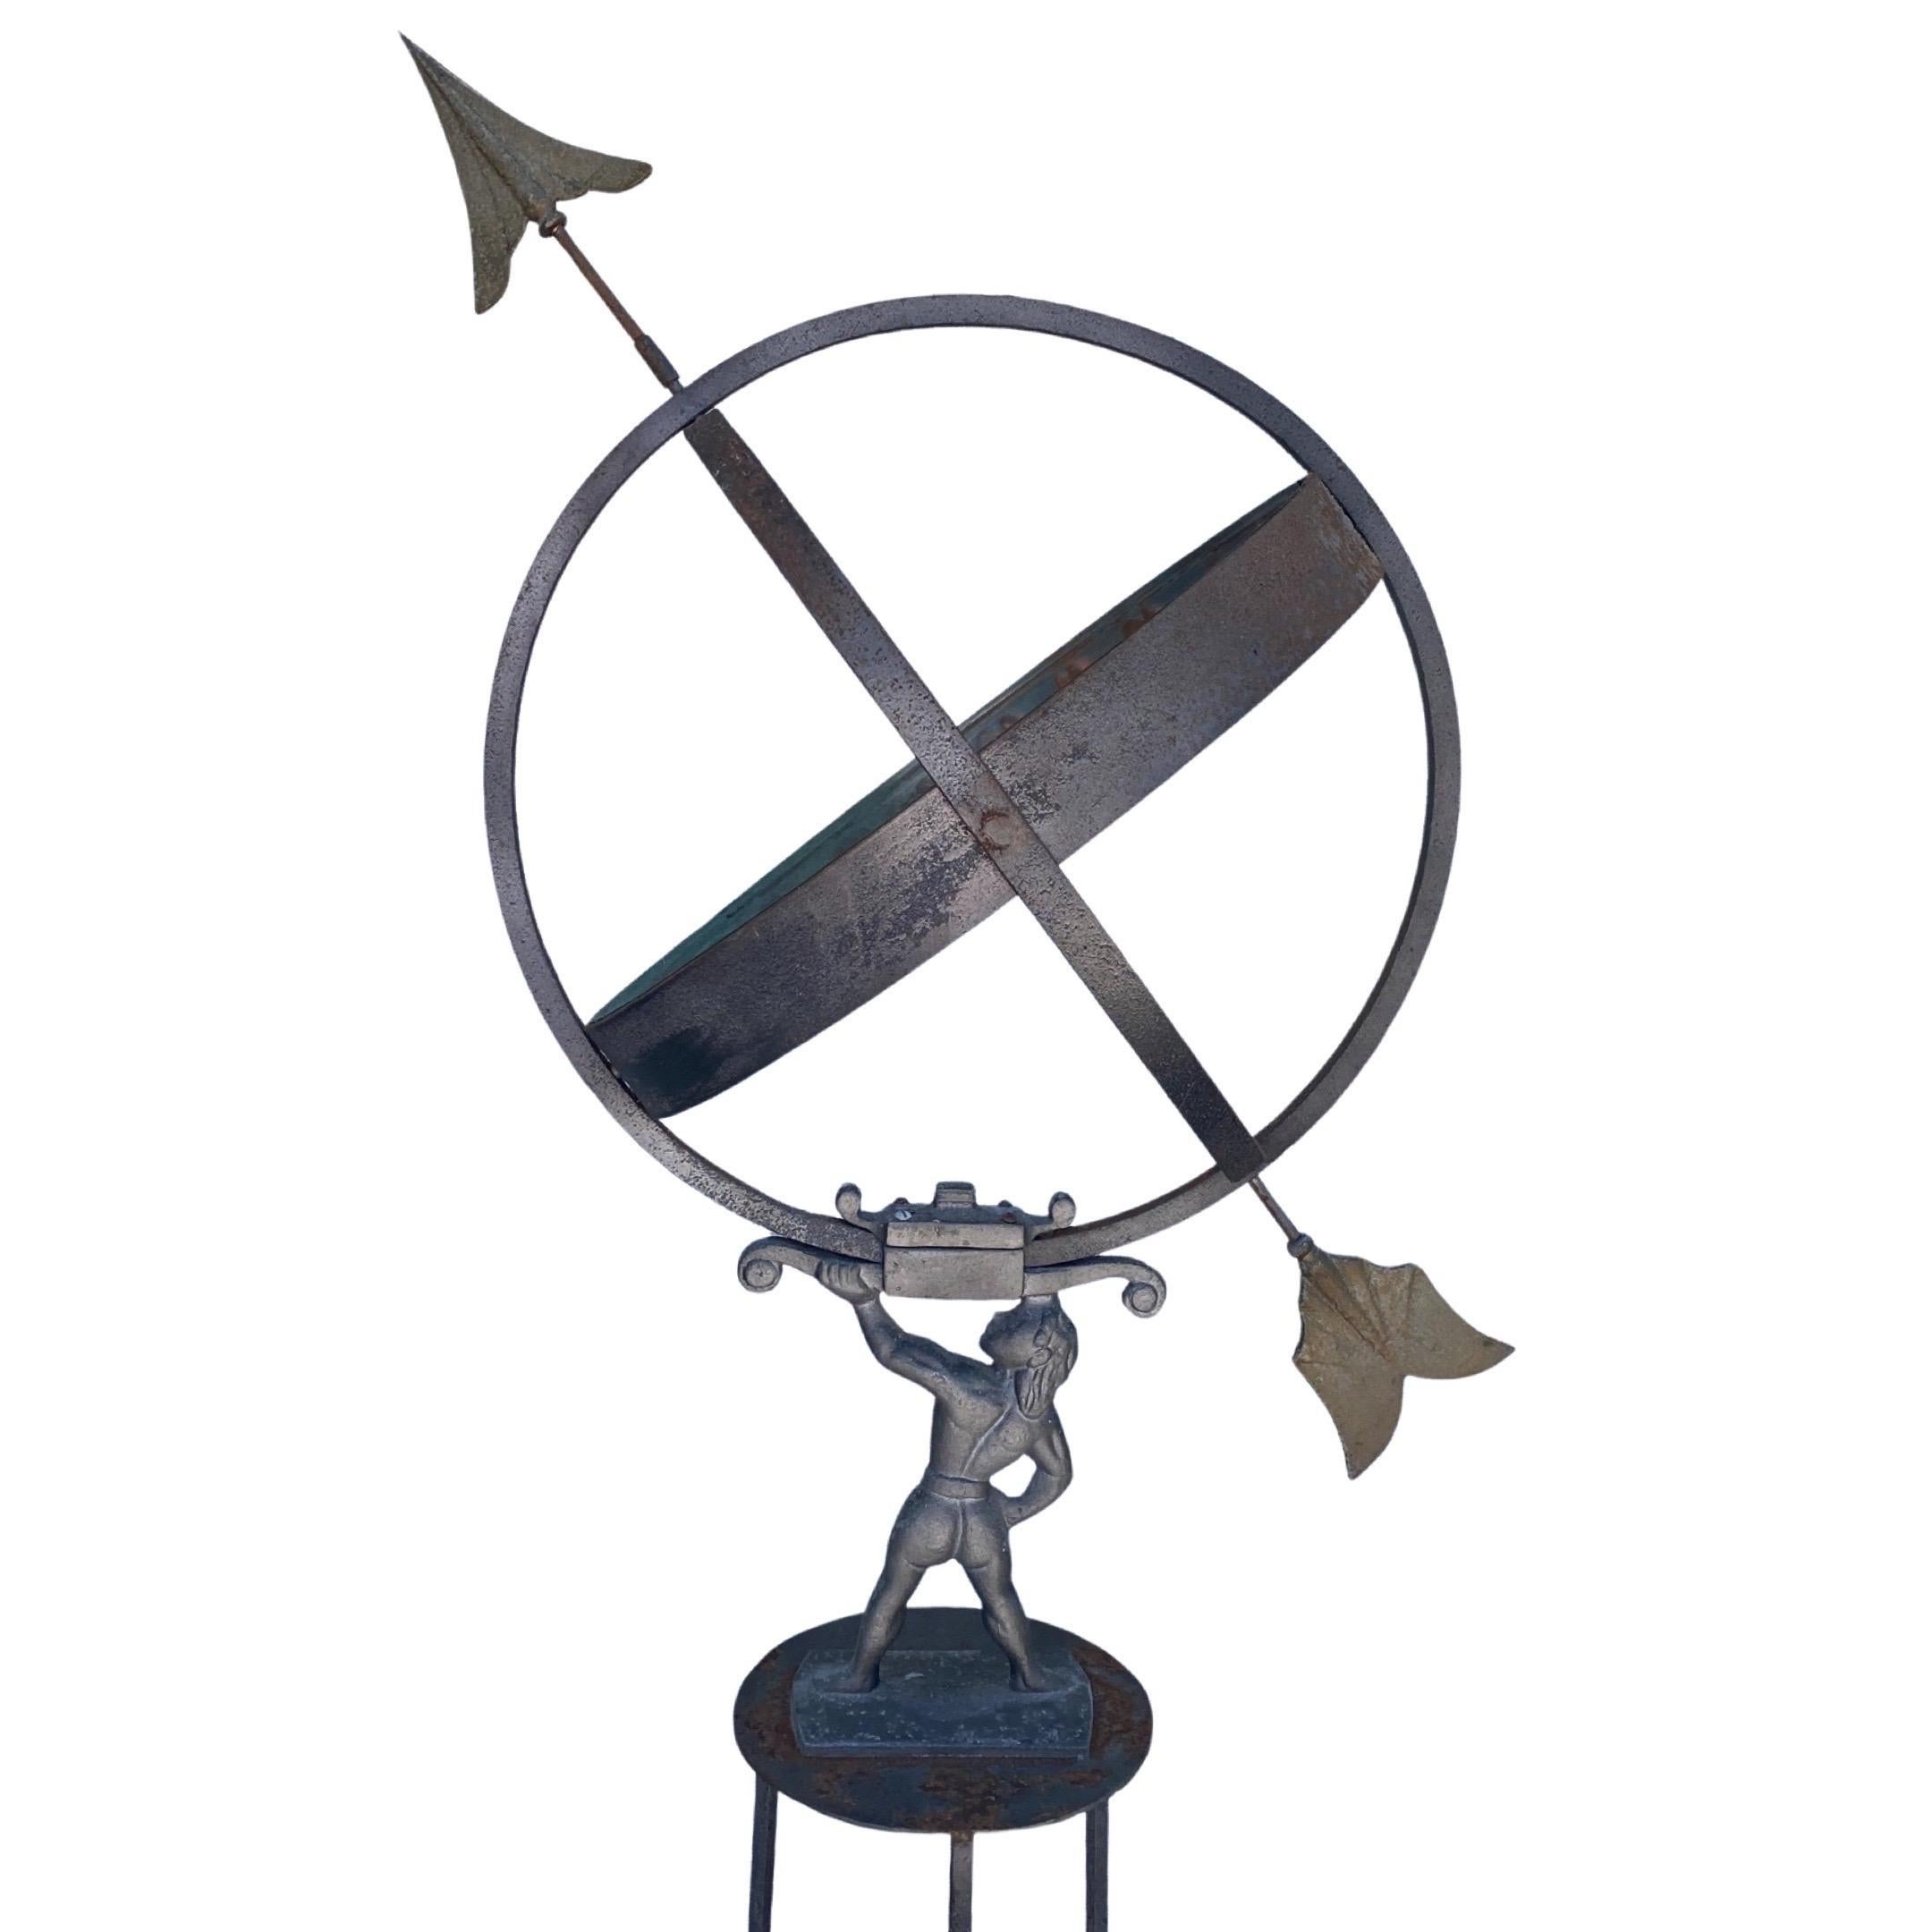 Hand-Crafted Vintage 1940s Copper and Metal Armillary Sculpture Architectural La Jolla Estate